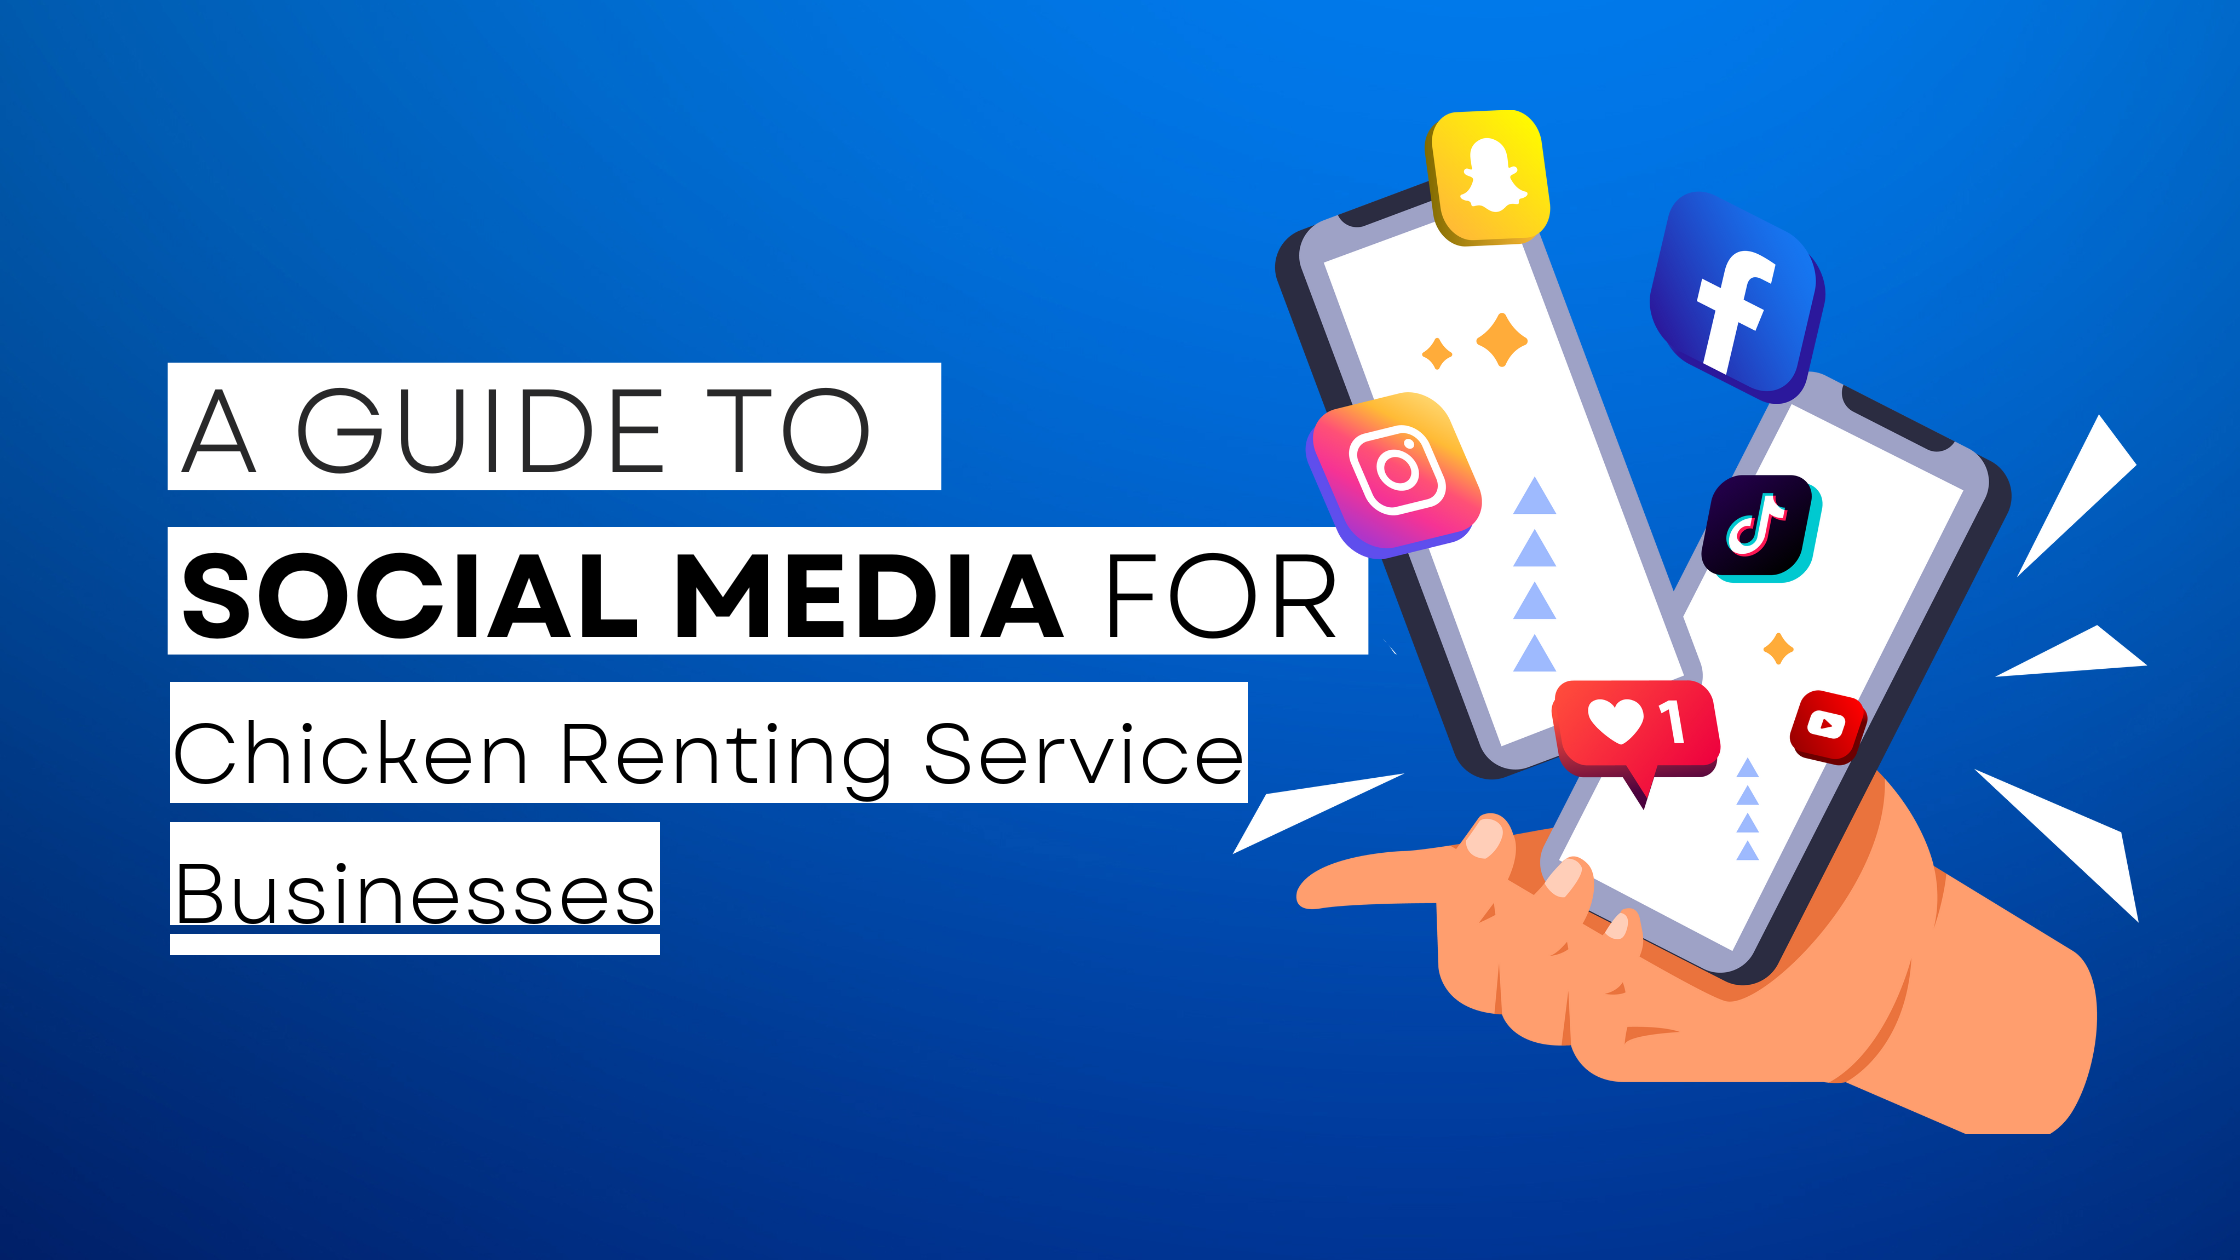 How to start Chicken Renting Service on social media